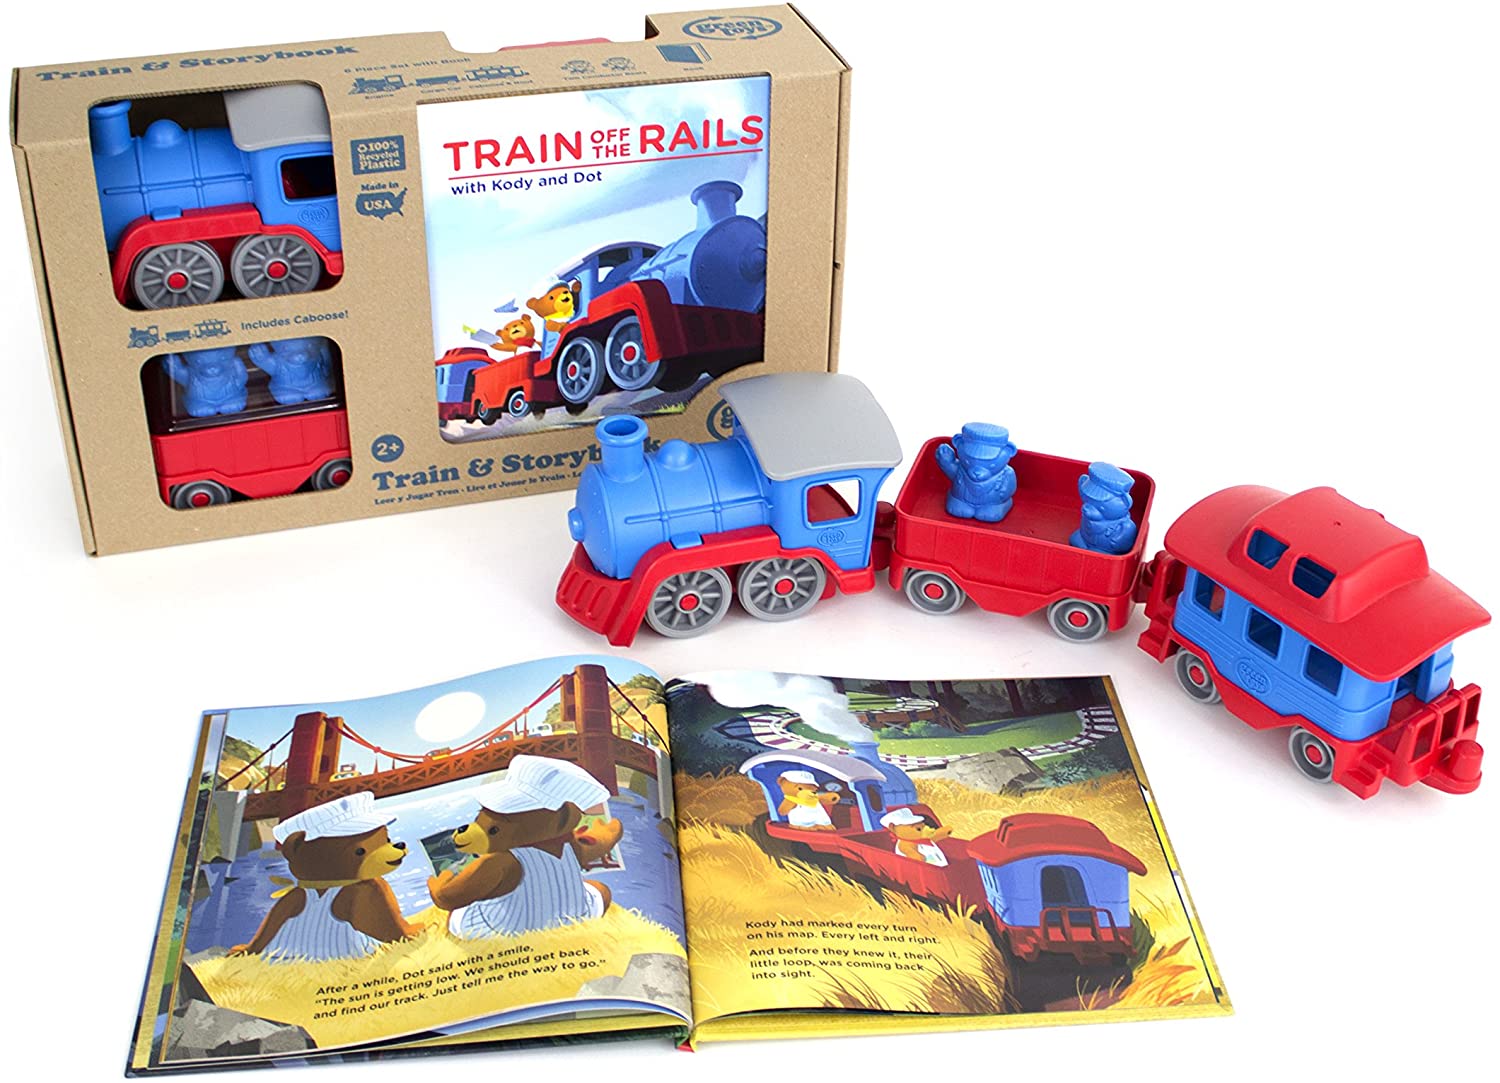 Green Toys Storybook Gift Set, Includes Train & Storybook - ANB Baby -$20 - $50